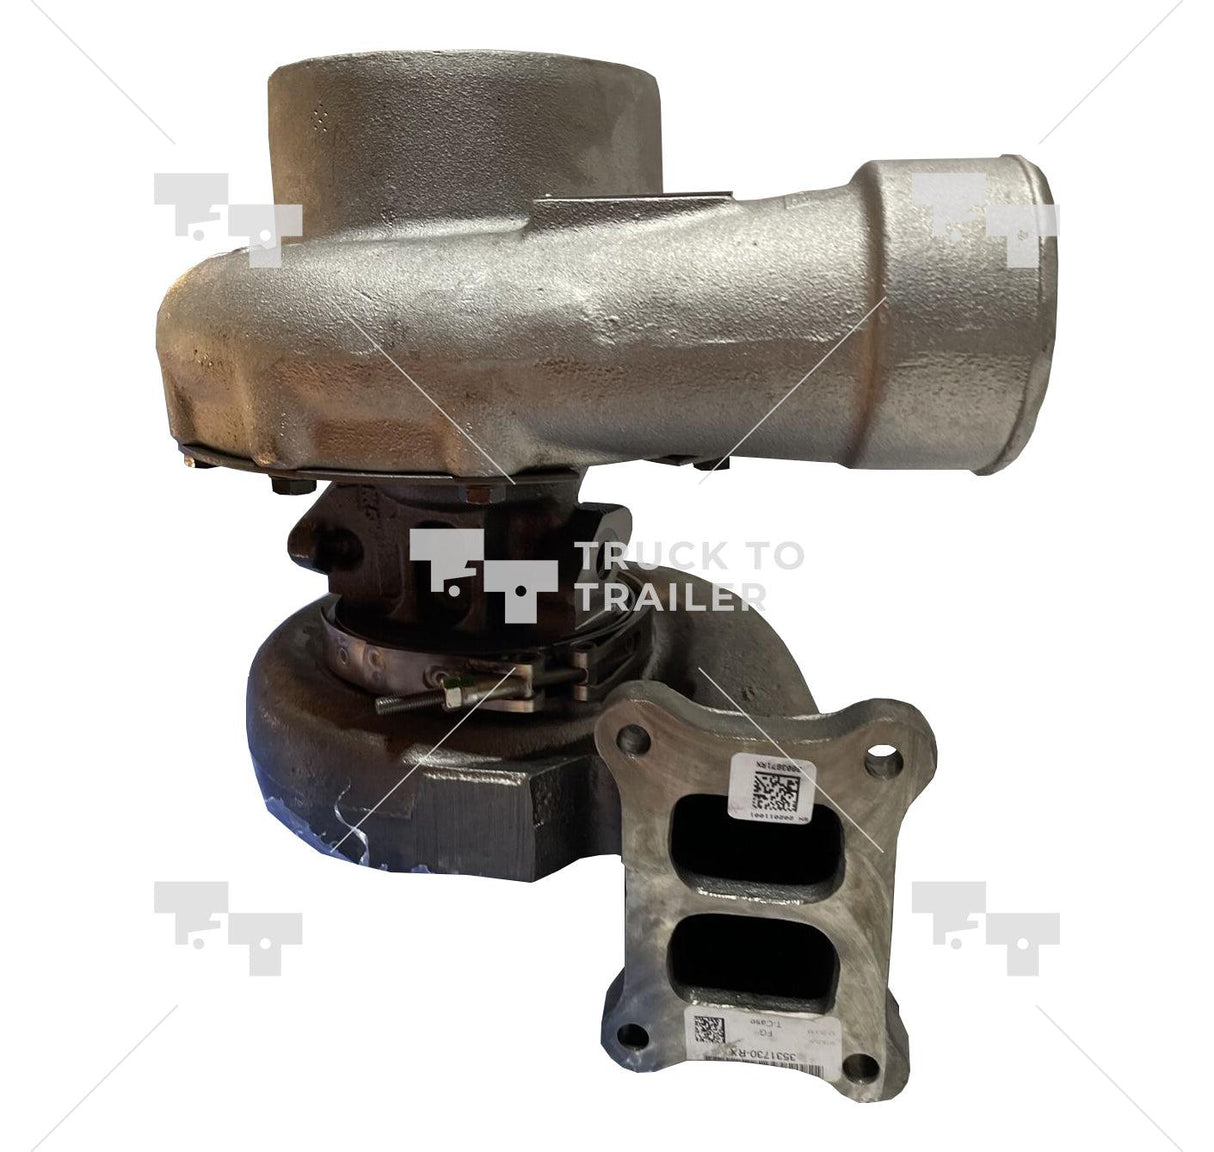 3803671Rx Oem Cummins Turbocharger Ht3B No Core Charge - Truck To Trailer